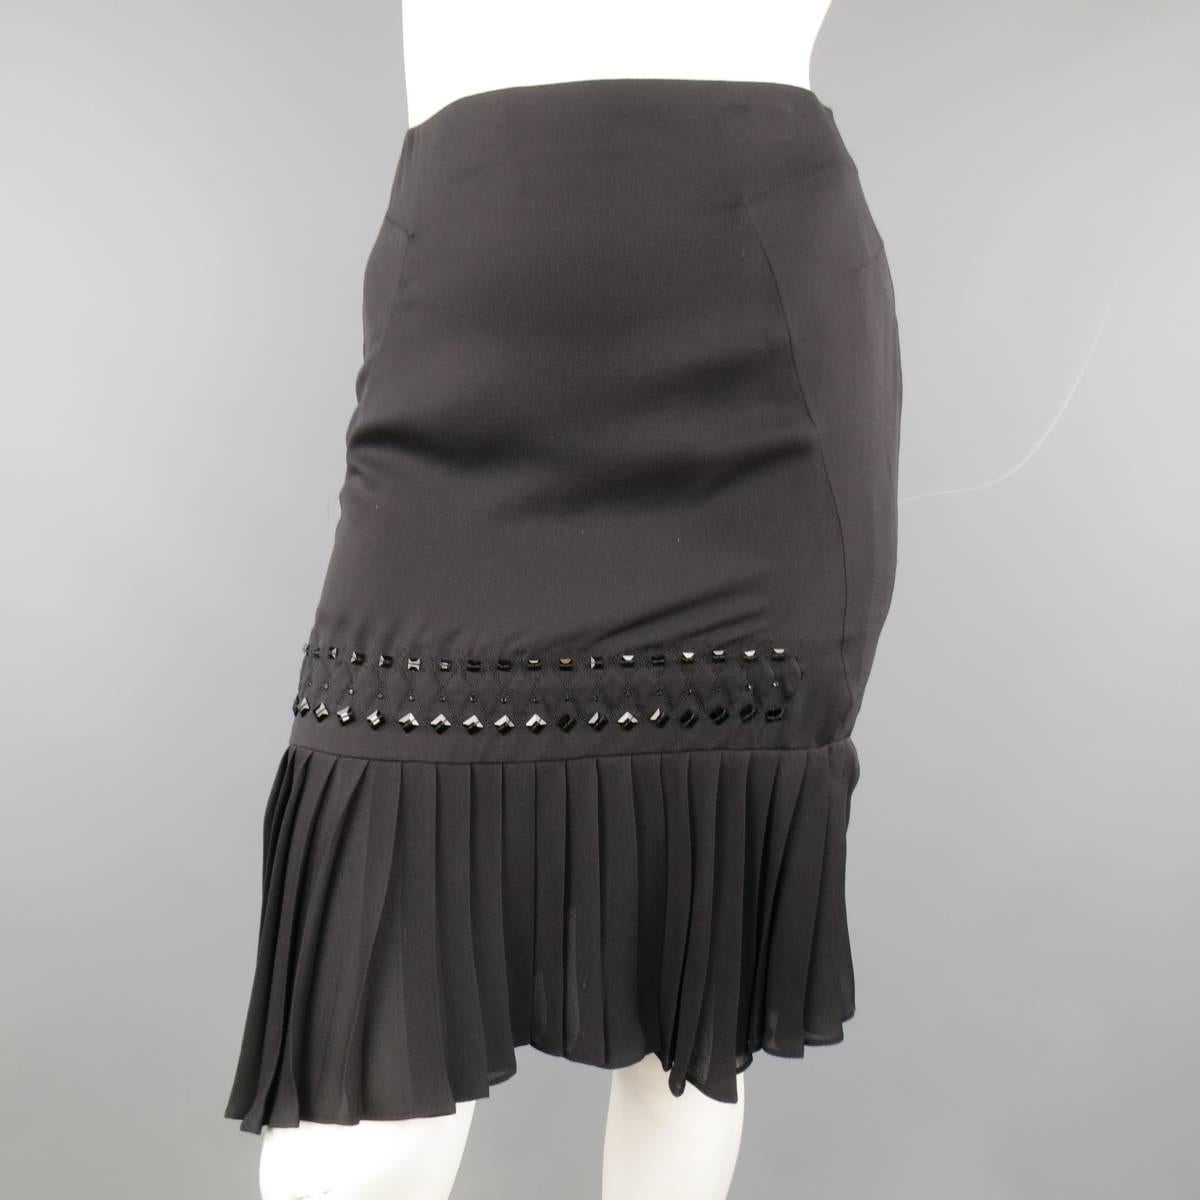 GUCCI pencil skirt in a light weight silk featuring a side paneled pencil silhouette, pleated hem, and embroidered diamond pattern with beading. Missing a Bead. As-Is. Made in Italy.
 
Good Pre-Owned Condition.
Marked: IT 38
 
Measurements:
 
Waist: